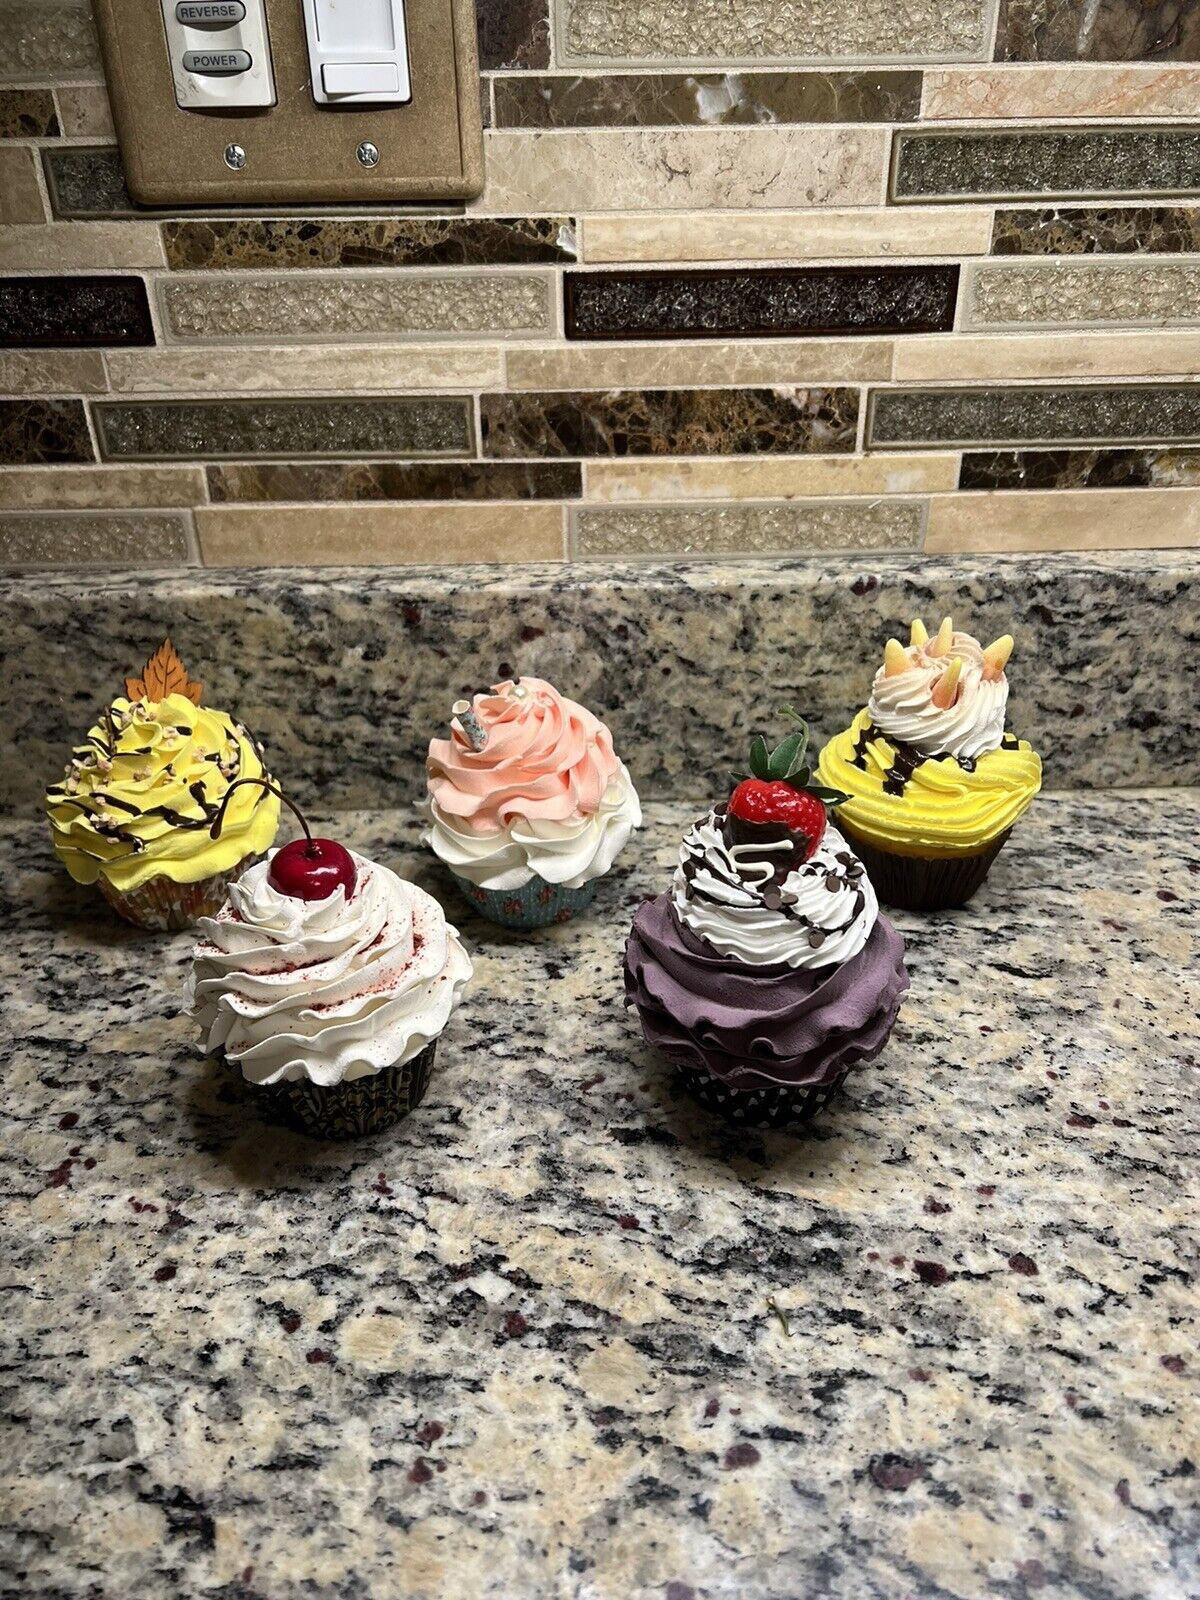 DEZICAKES Handmade “Forever Cakes” Faux Cupcakes Lot of 5 Different Designs